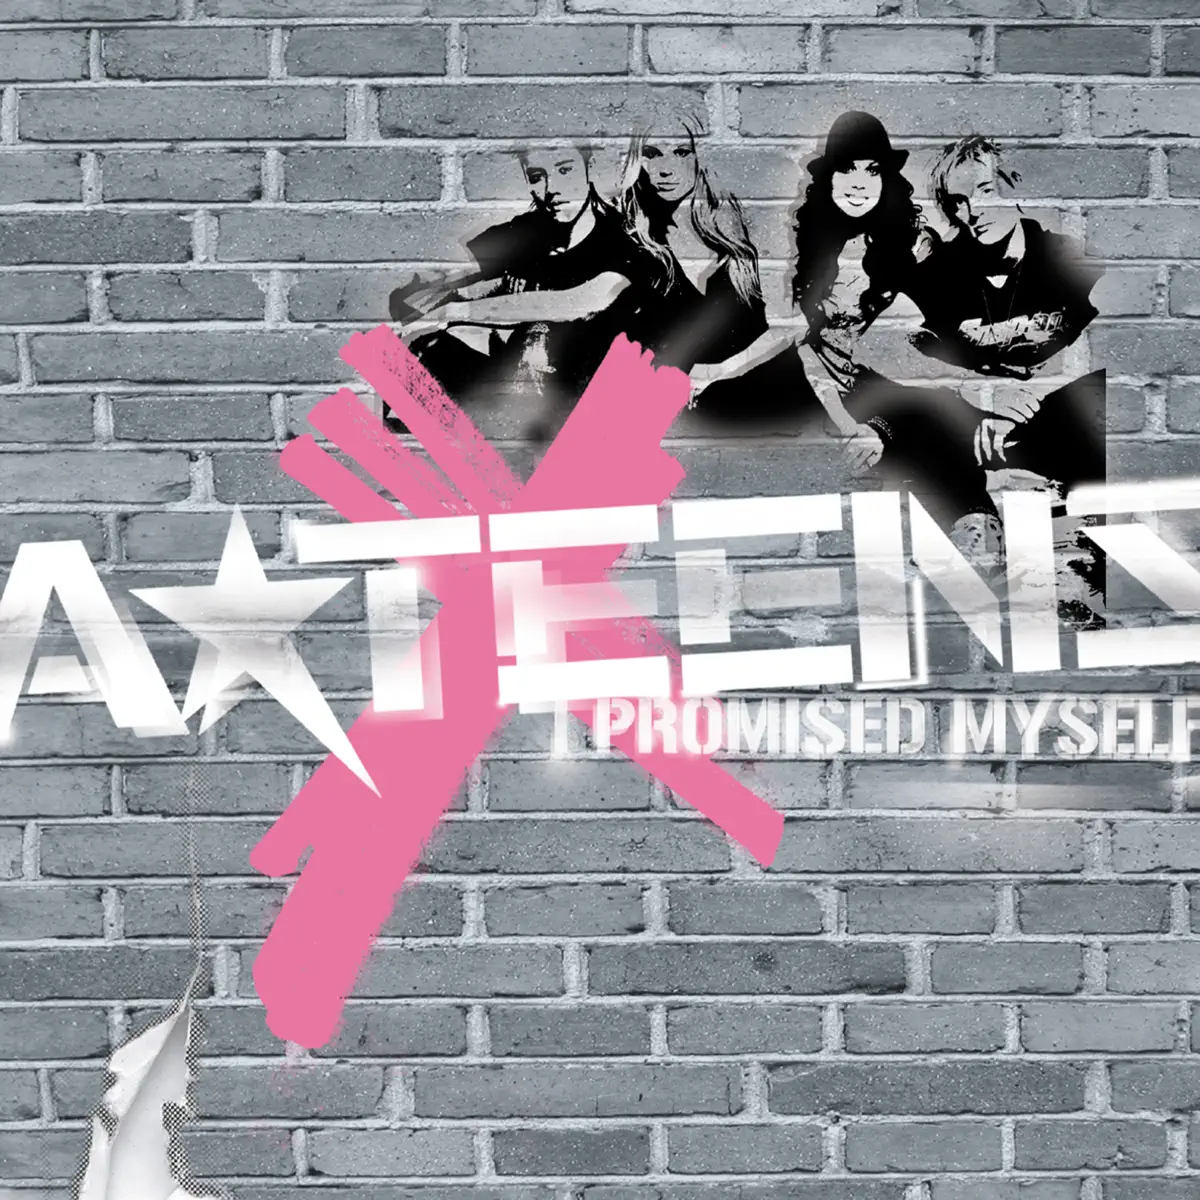 A*Teens - I Promised Myself (Remixes) - EP (2004) [iTunes Plus AAC M4A]-新房子